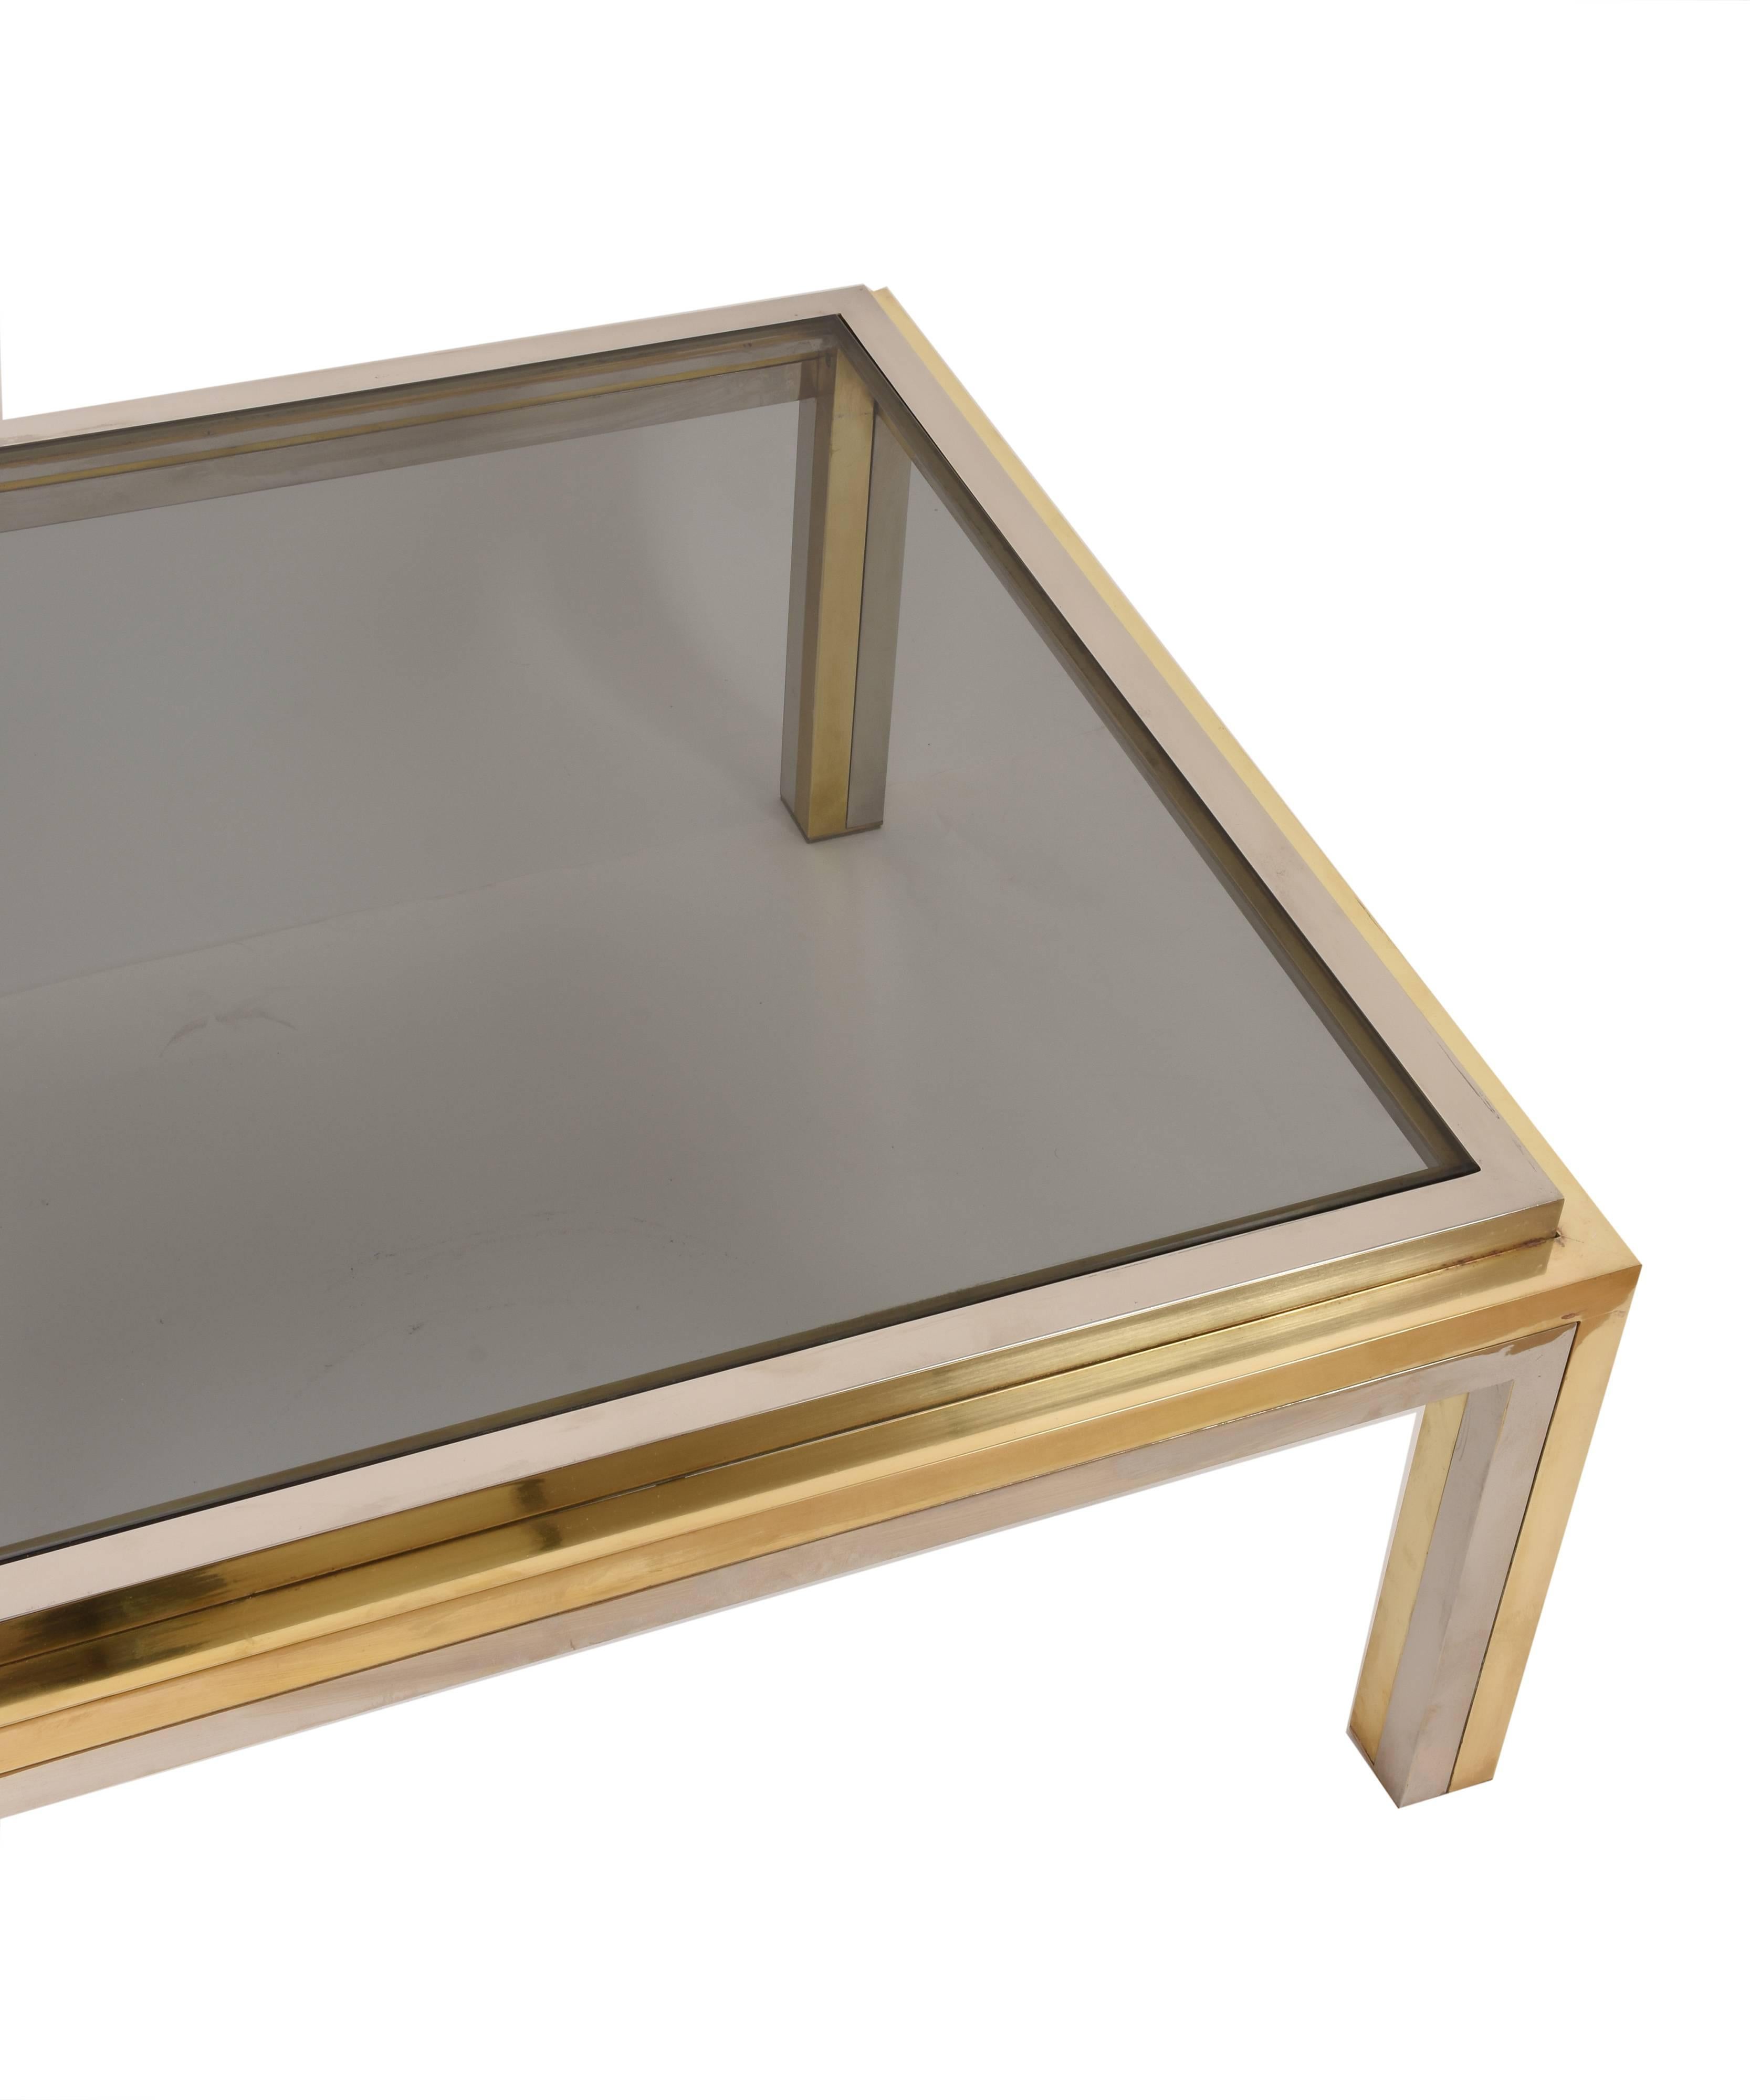 Italian Romeo Rega, Square Coffee Table in Brass and Chrome, Smoked Glass, Italy, 1970s